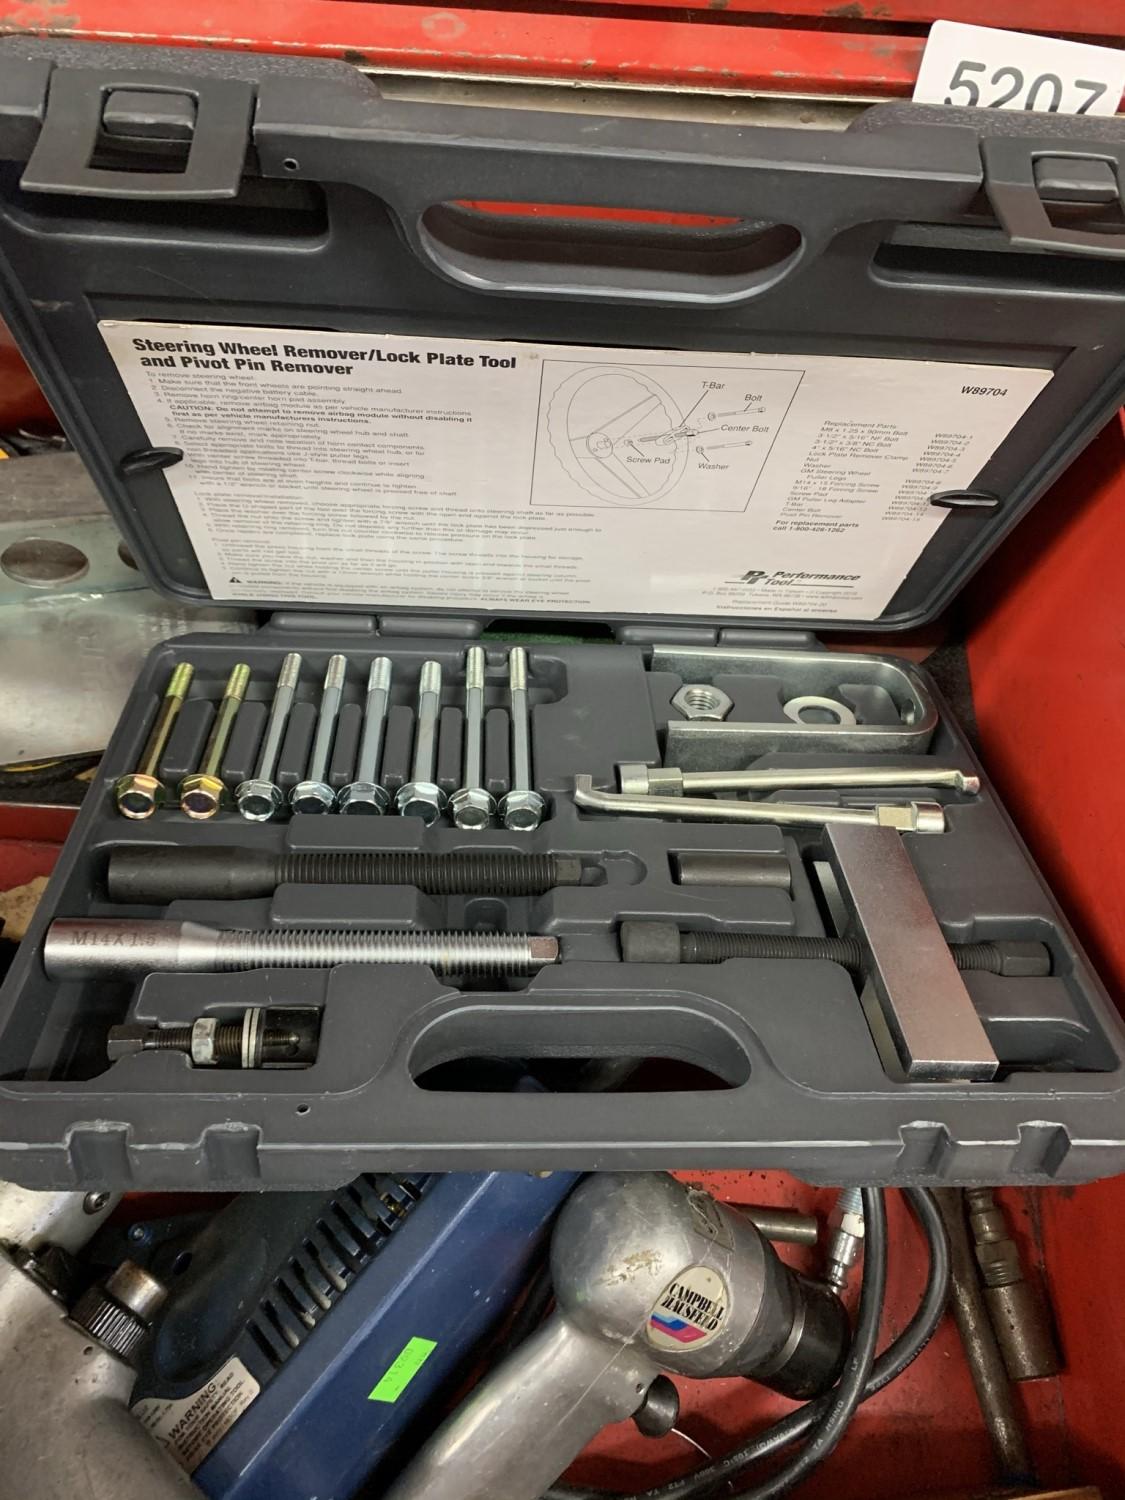 Contents of 1 Drawer Including - Harmonic Balancer Tester, Snap-On Impact & More